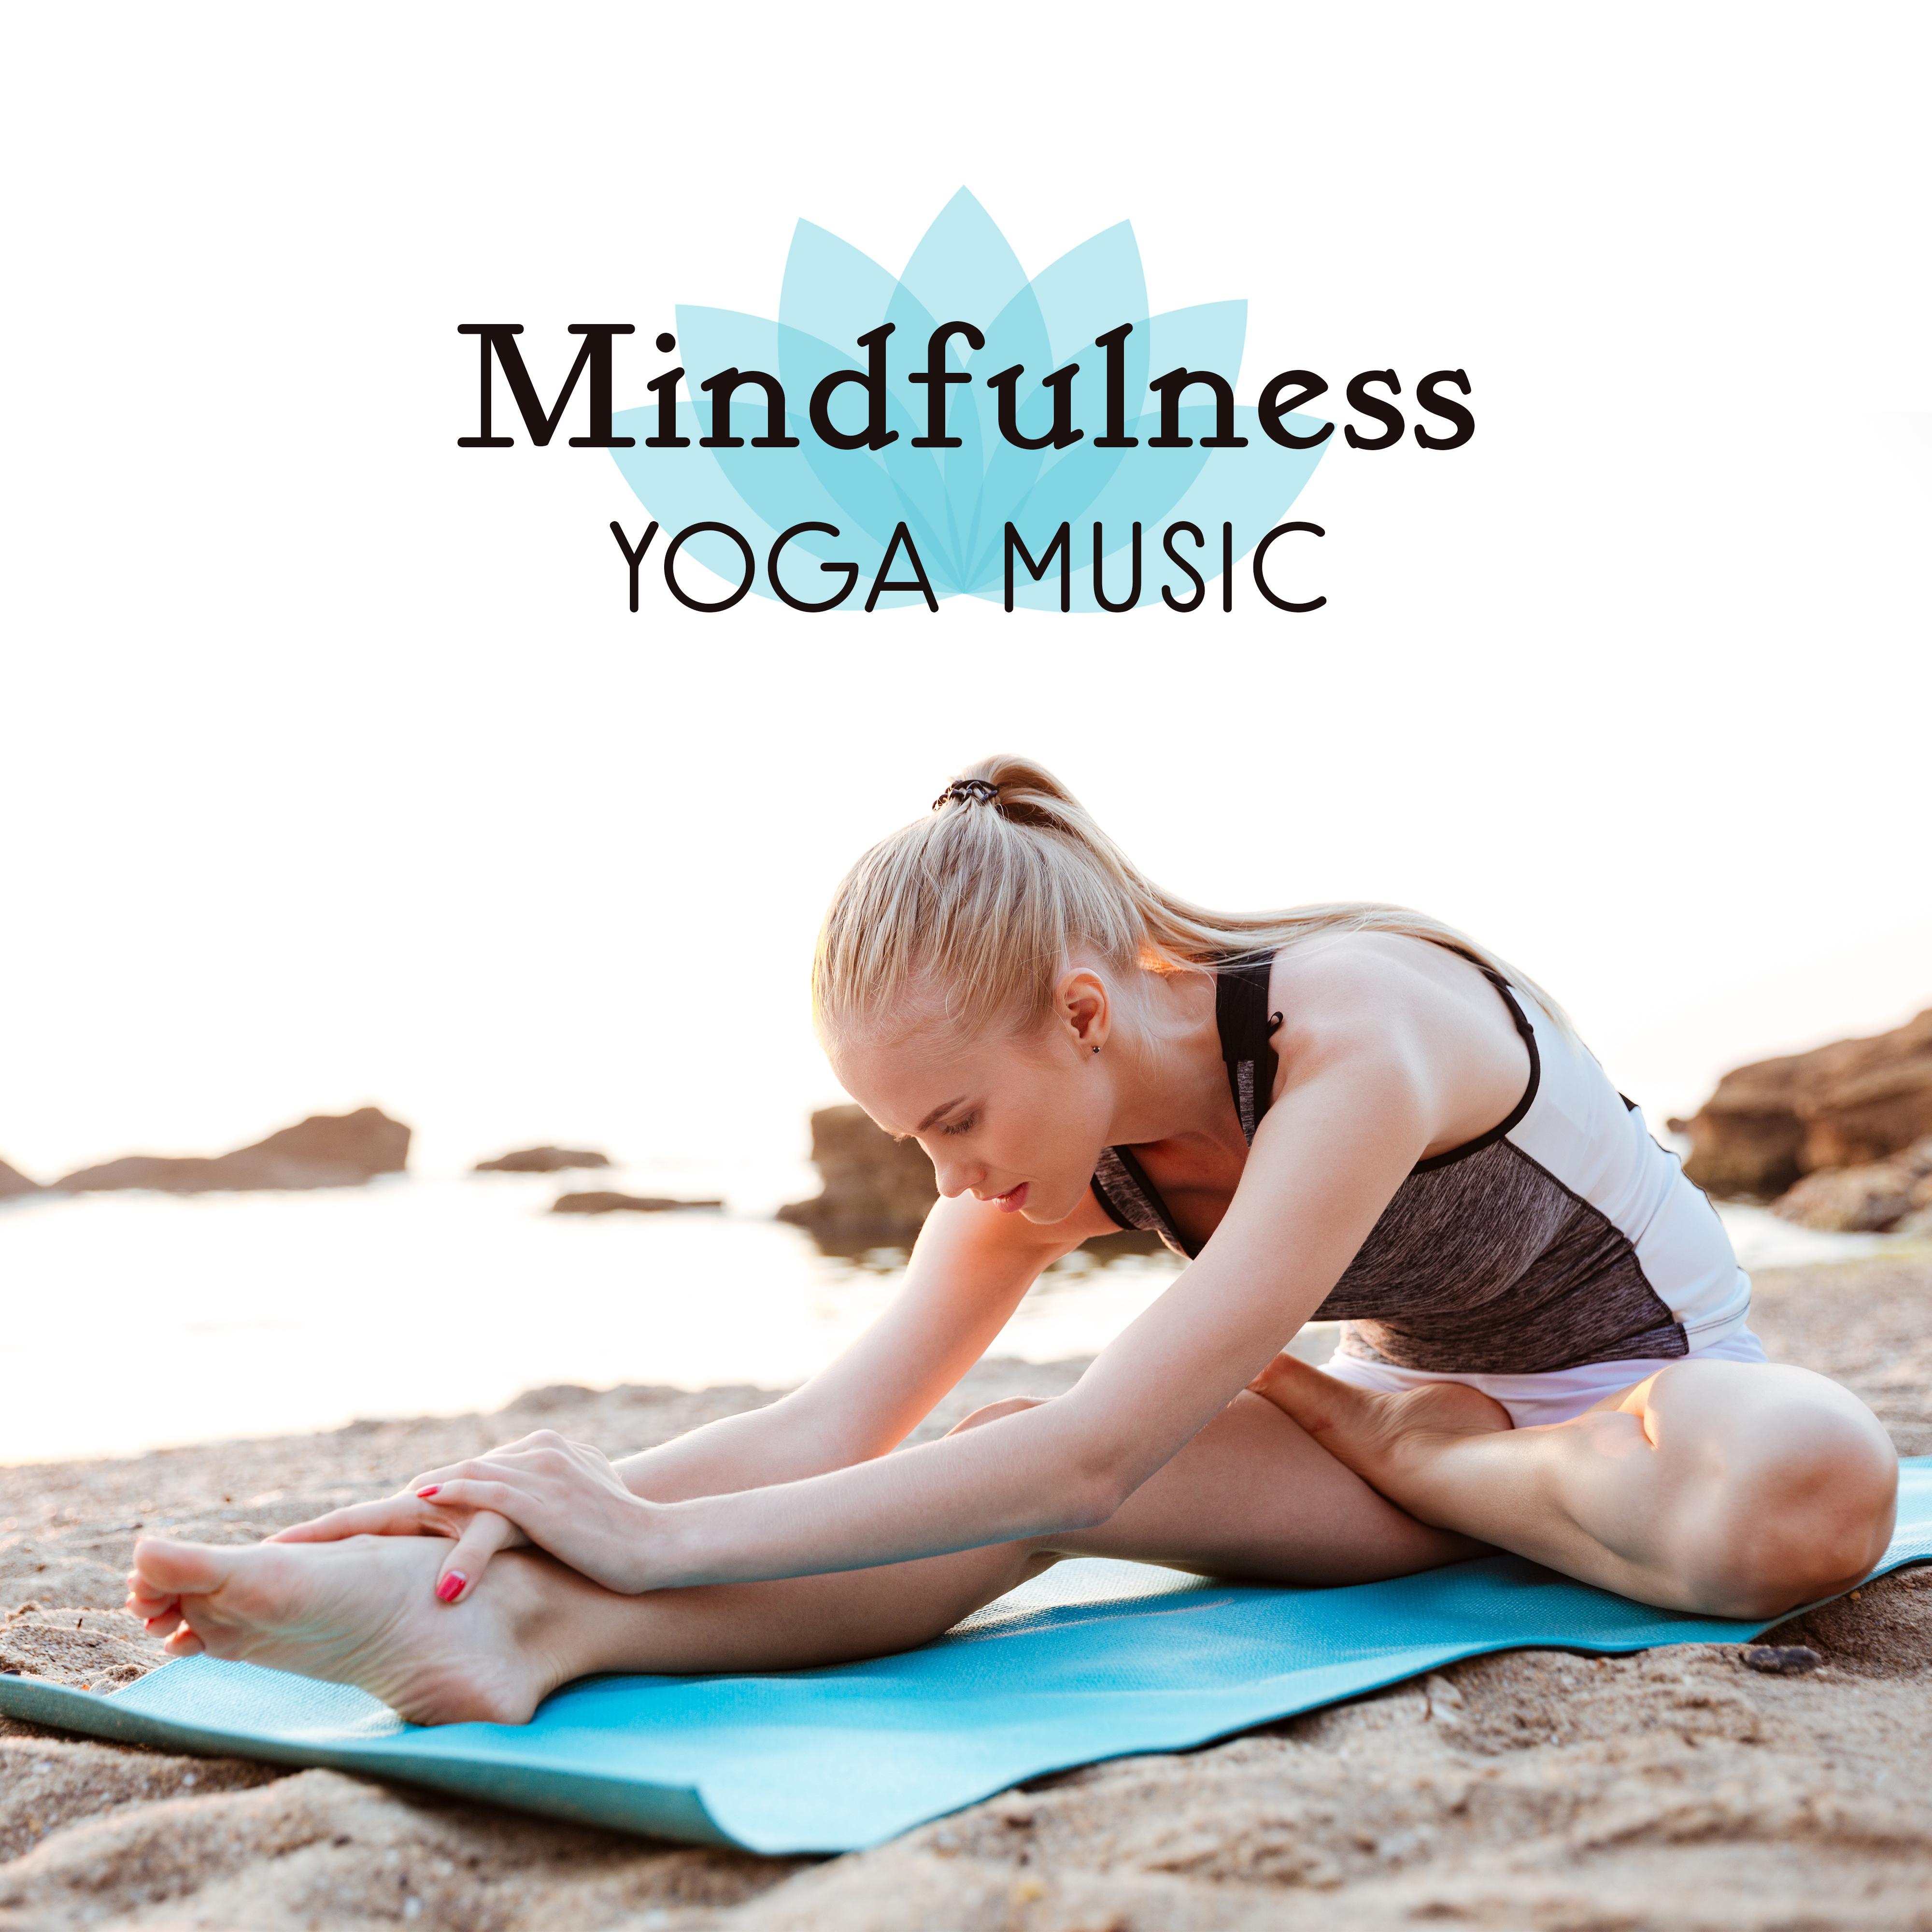 Mindfulness Yoga Music – Yoga Relaxation, Mind & Body Rest, Inner Peace, Stress Relief